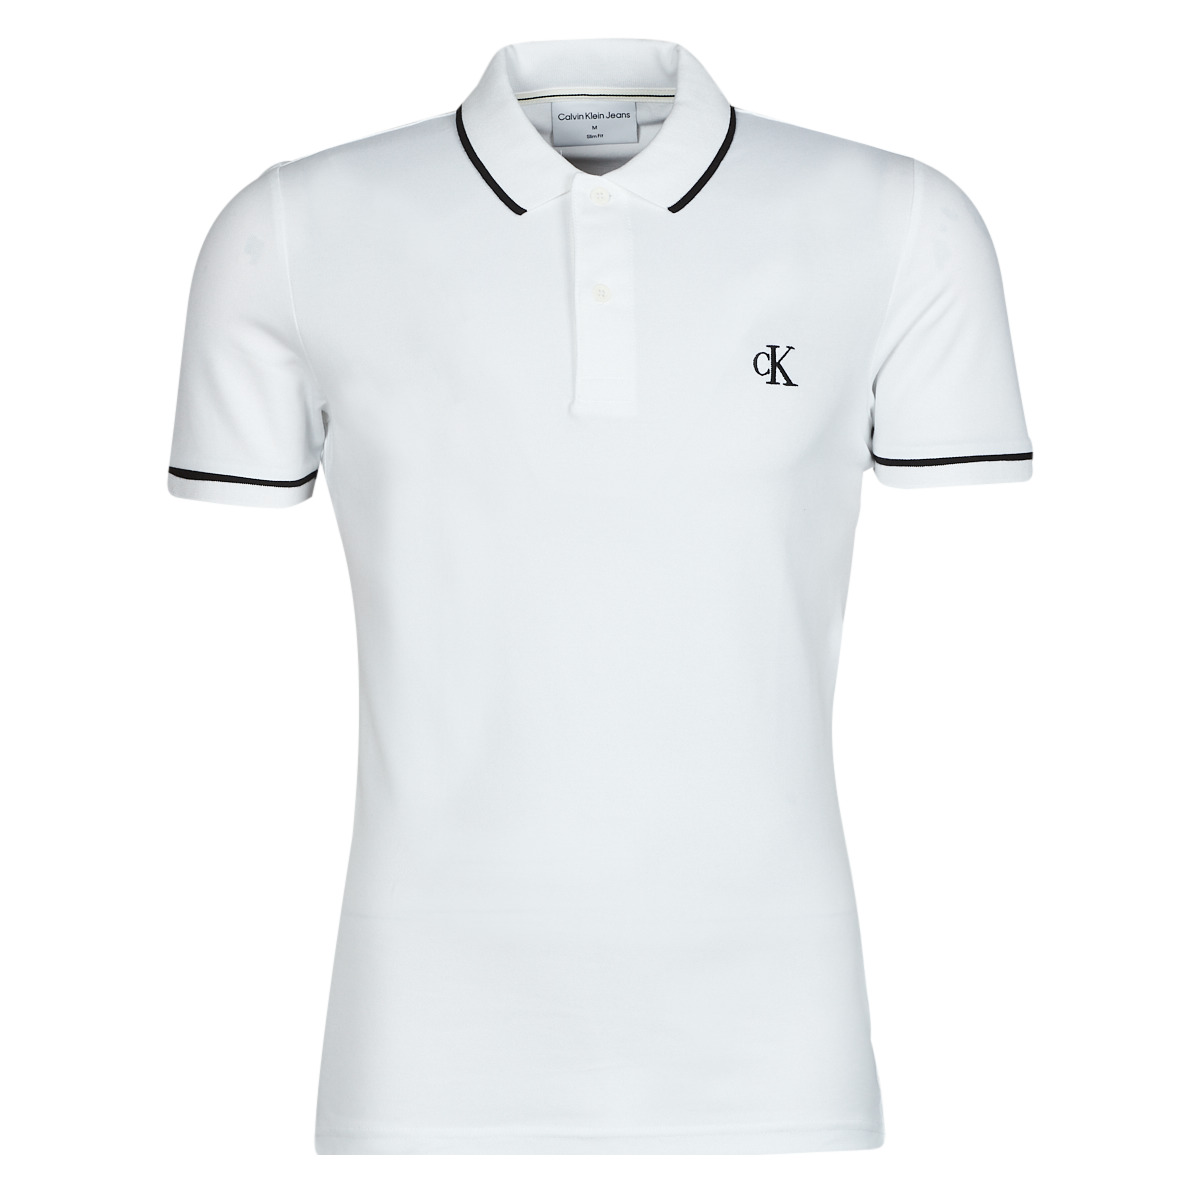 Calvin Klein Jeans TIPPING SLIM delivery Spartoo / polo NET | - short-sleeved White - Clothing POLO Men Black ! shirts Free